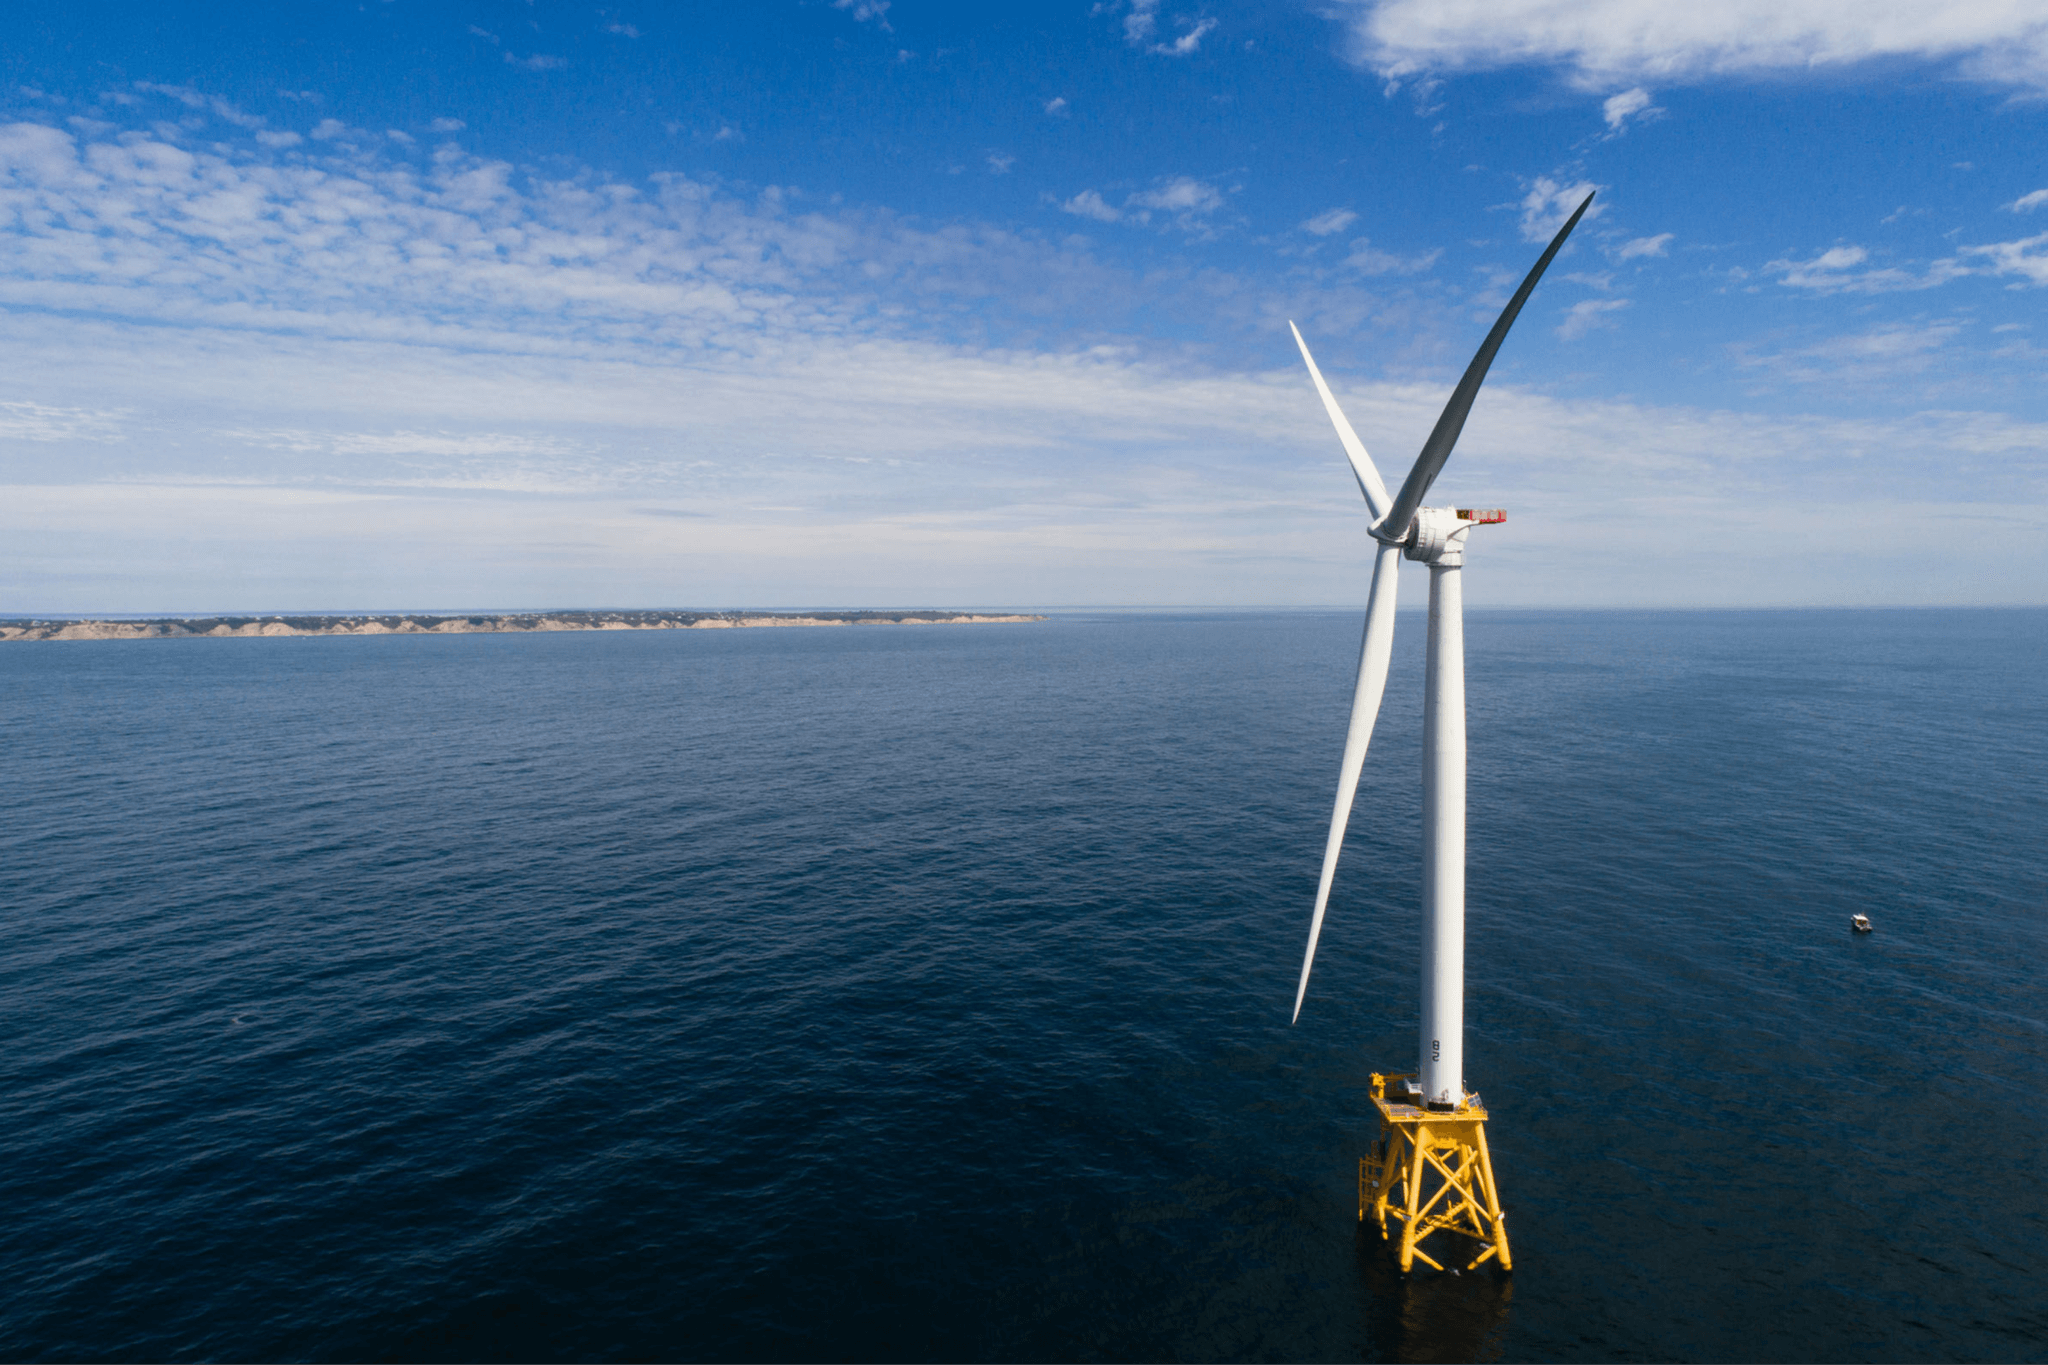 Photo of a off-shore wind turbine in the middle of a body of water.